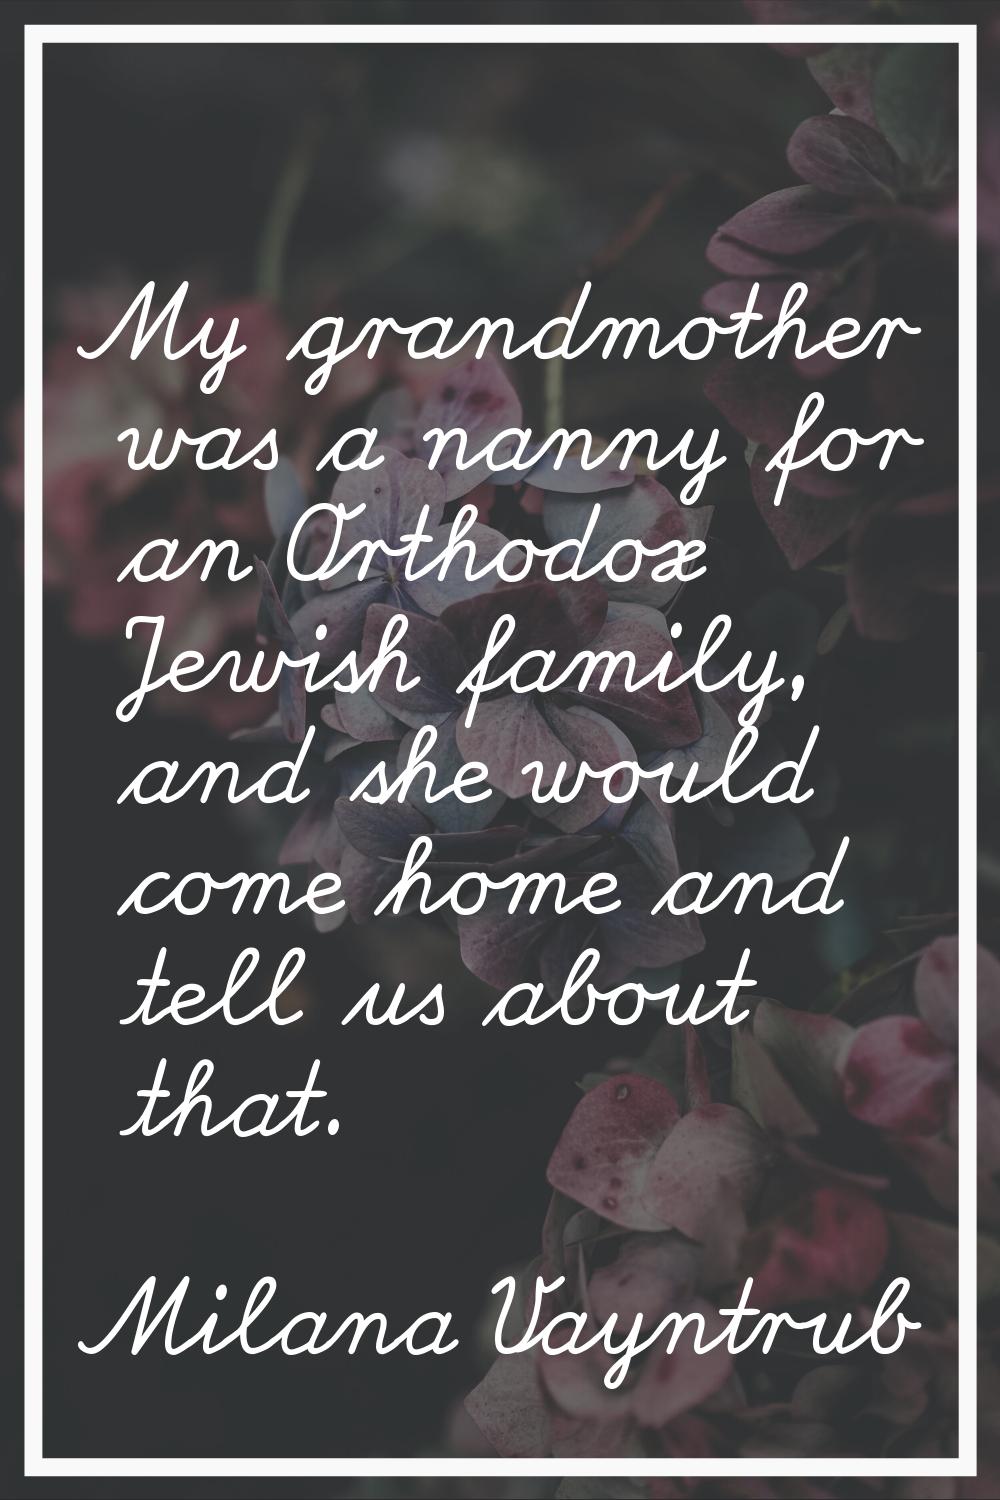 My grandmother was a nanny for an Orthodox Jewish family, and she would come home and tell us about